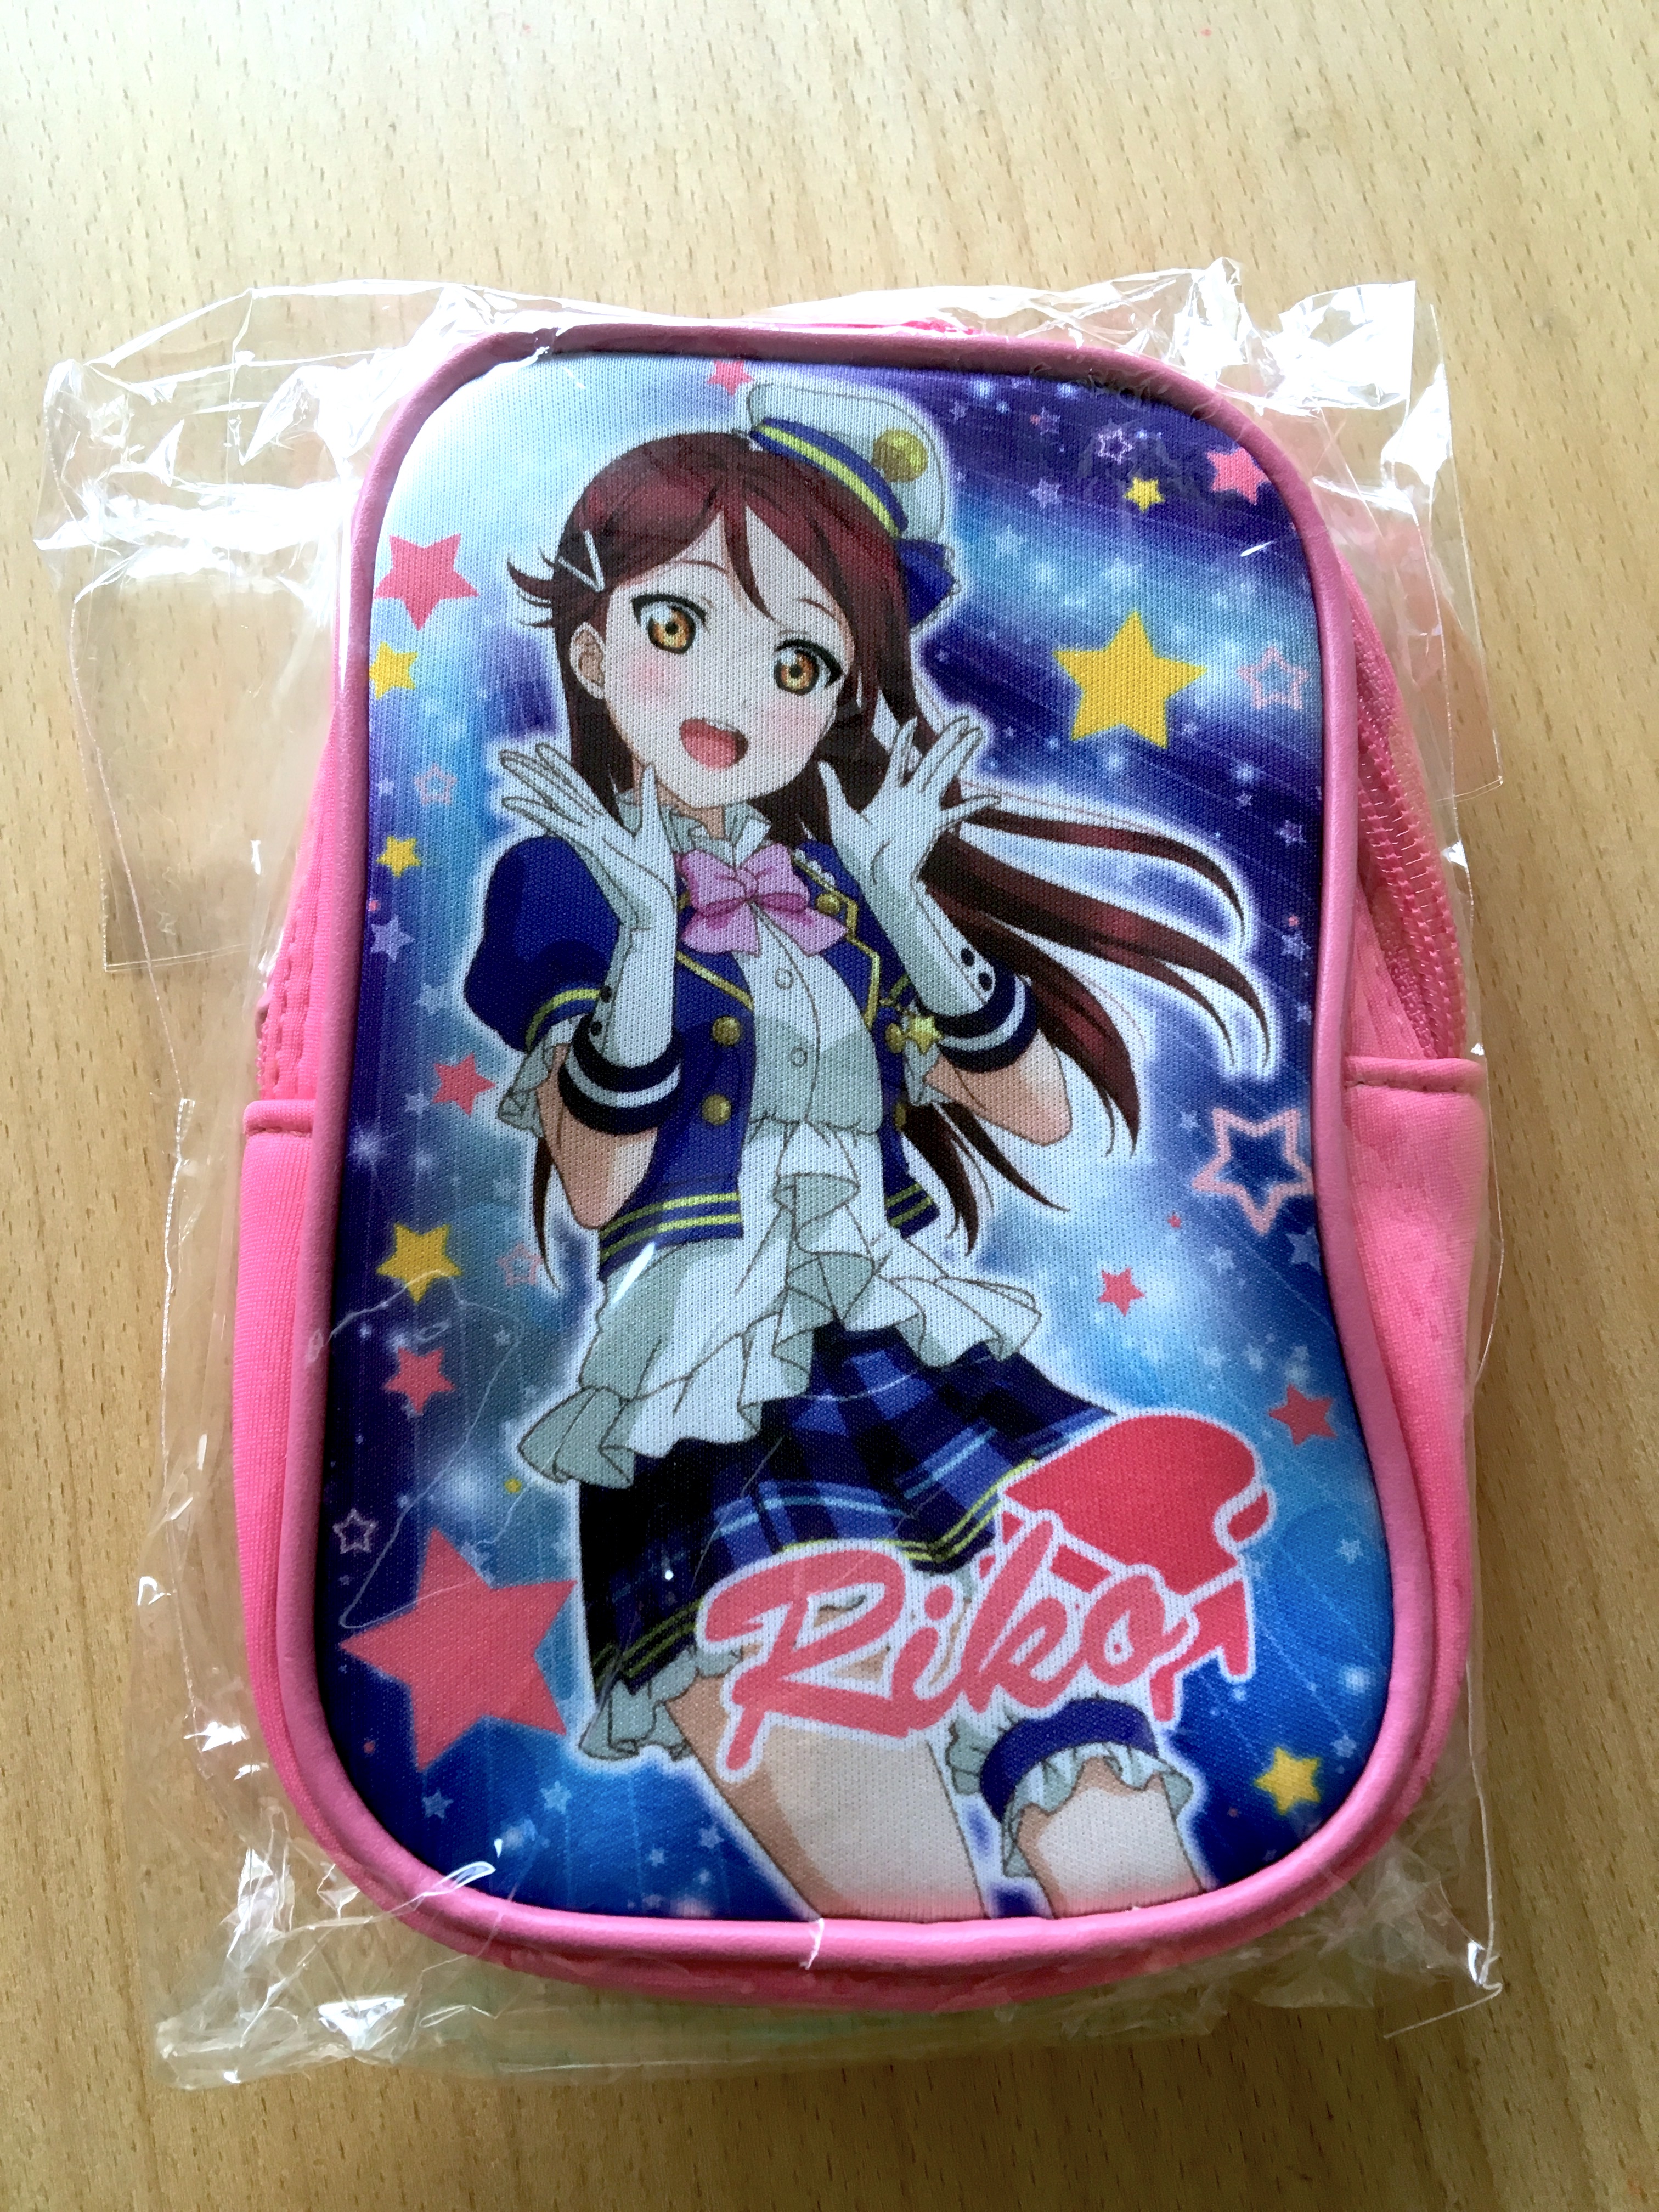 Riko pouch - can carry a smartphone + wallet + makeup easily